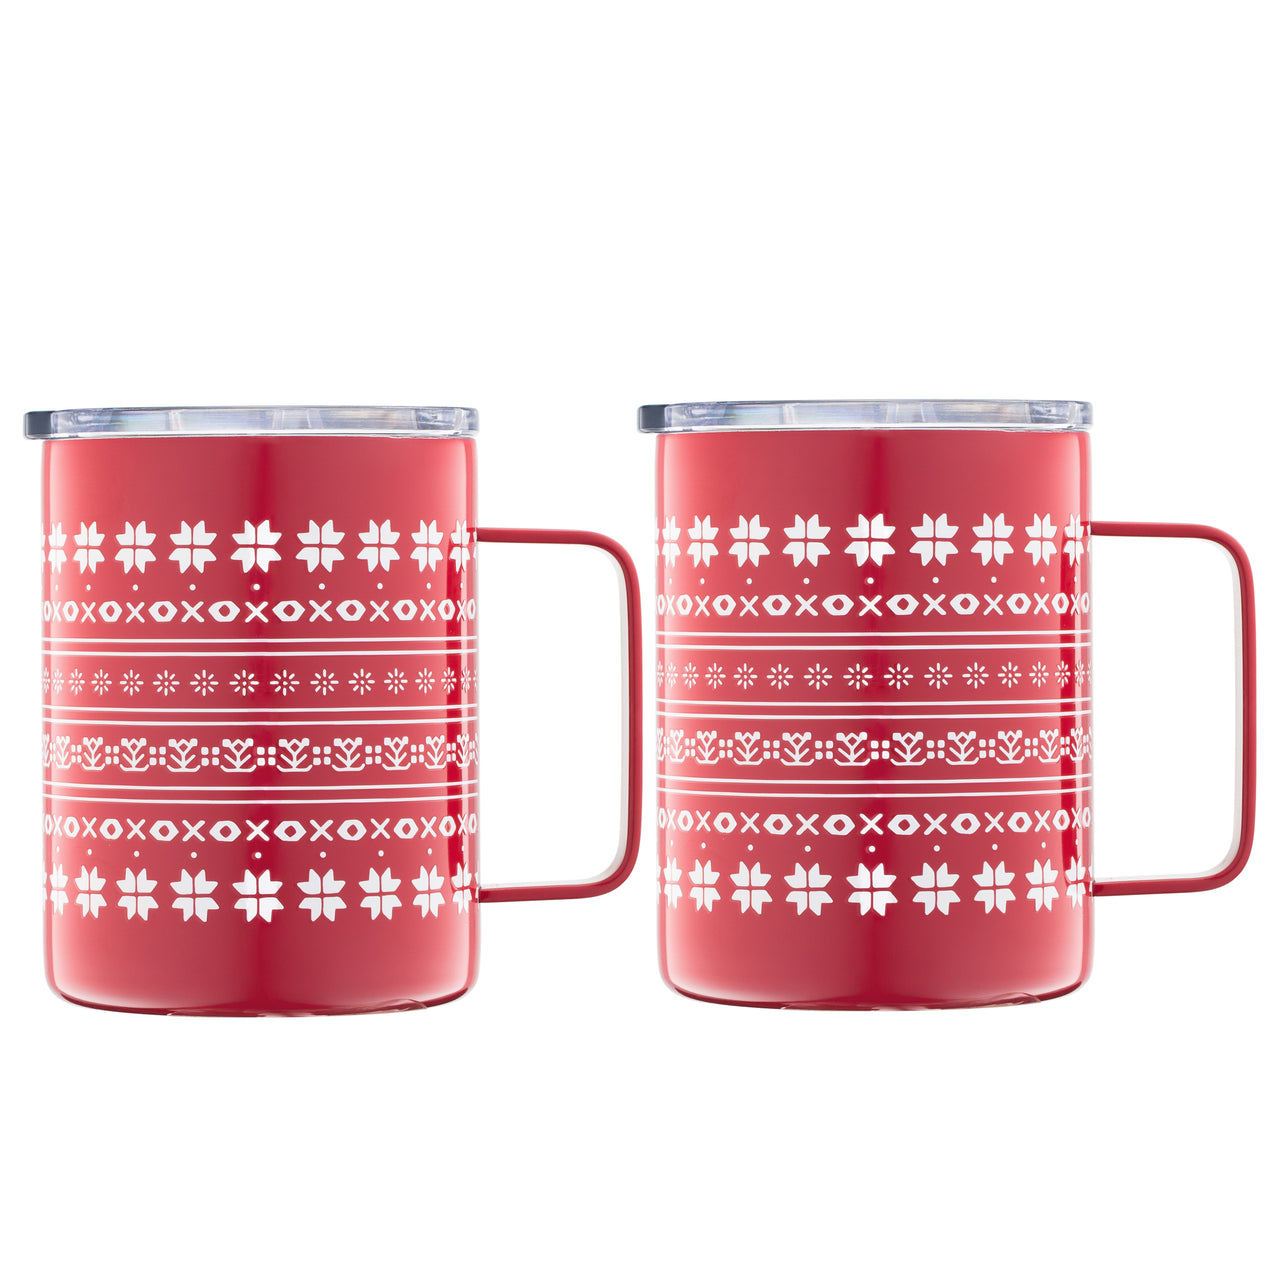 20 oz Stackable Plaid Coffee Mugs, Set of 2 by Cambridge Home